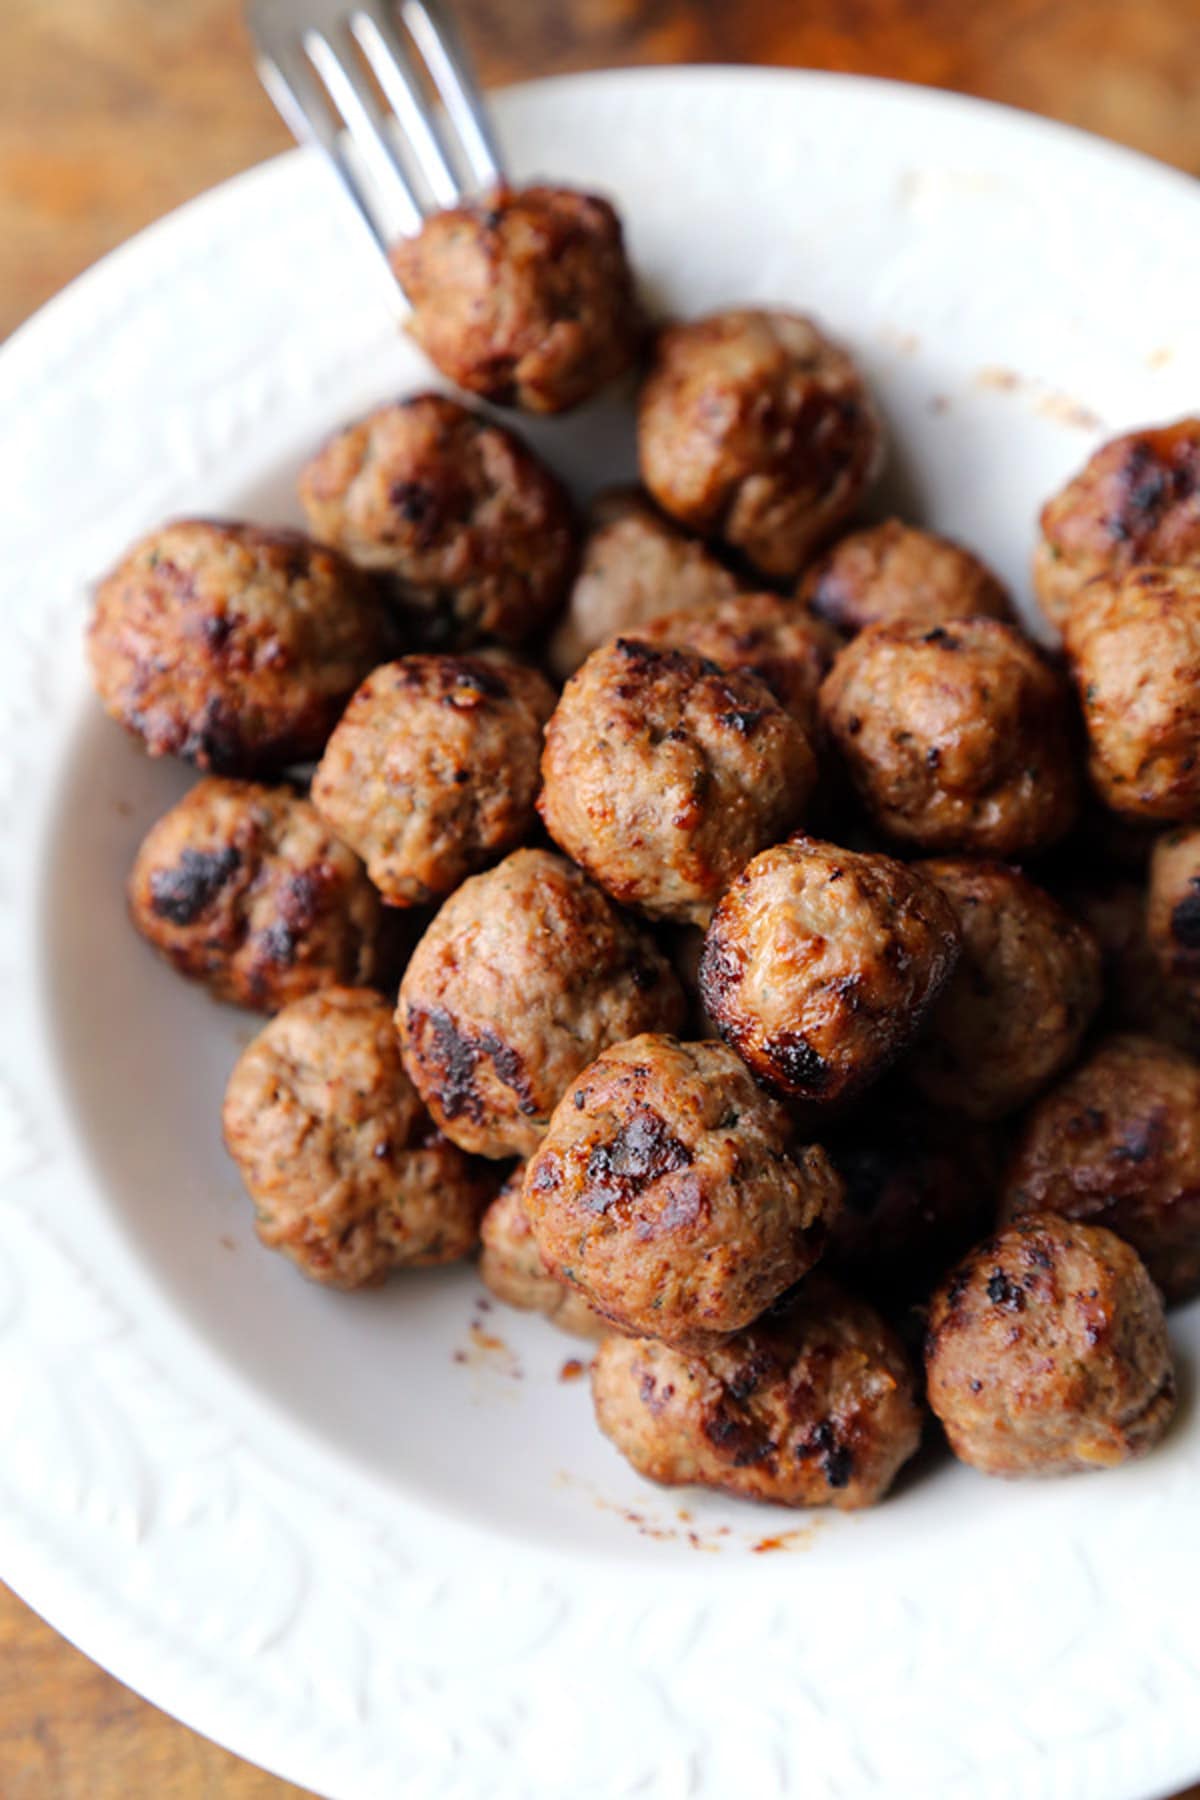 Cooked meatballs